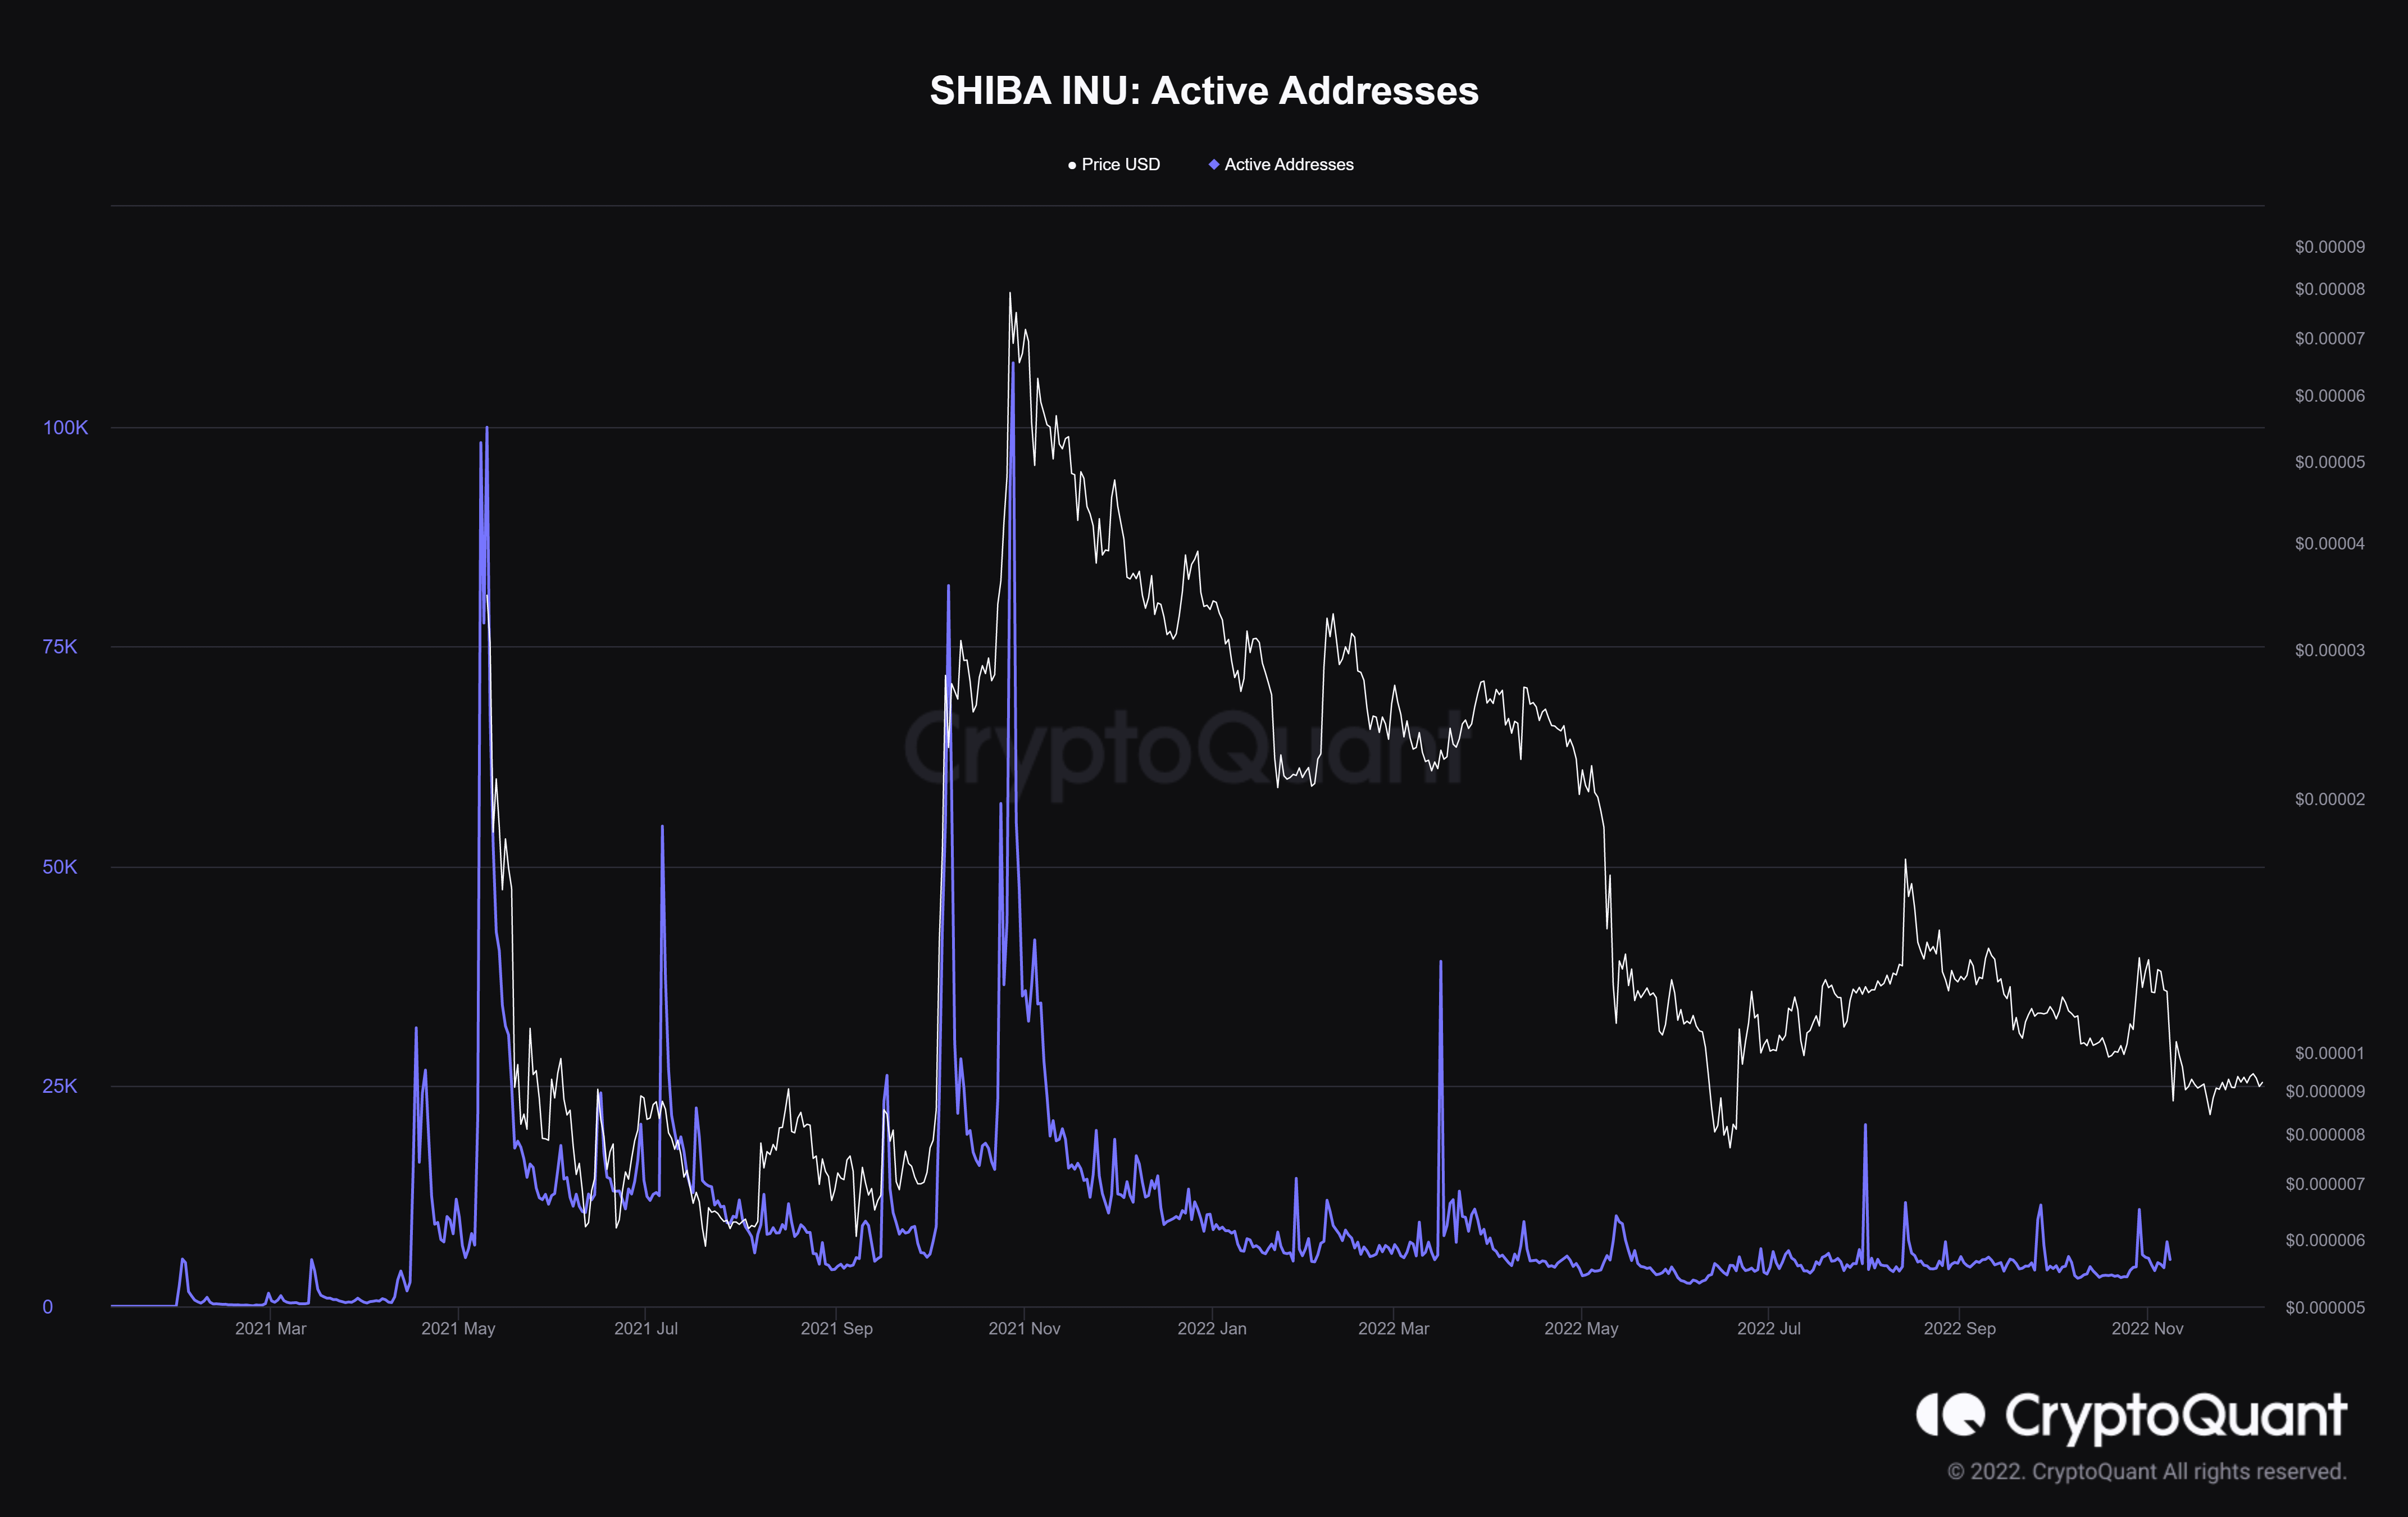 Shiba Inu's active addresses declined with the token's prices